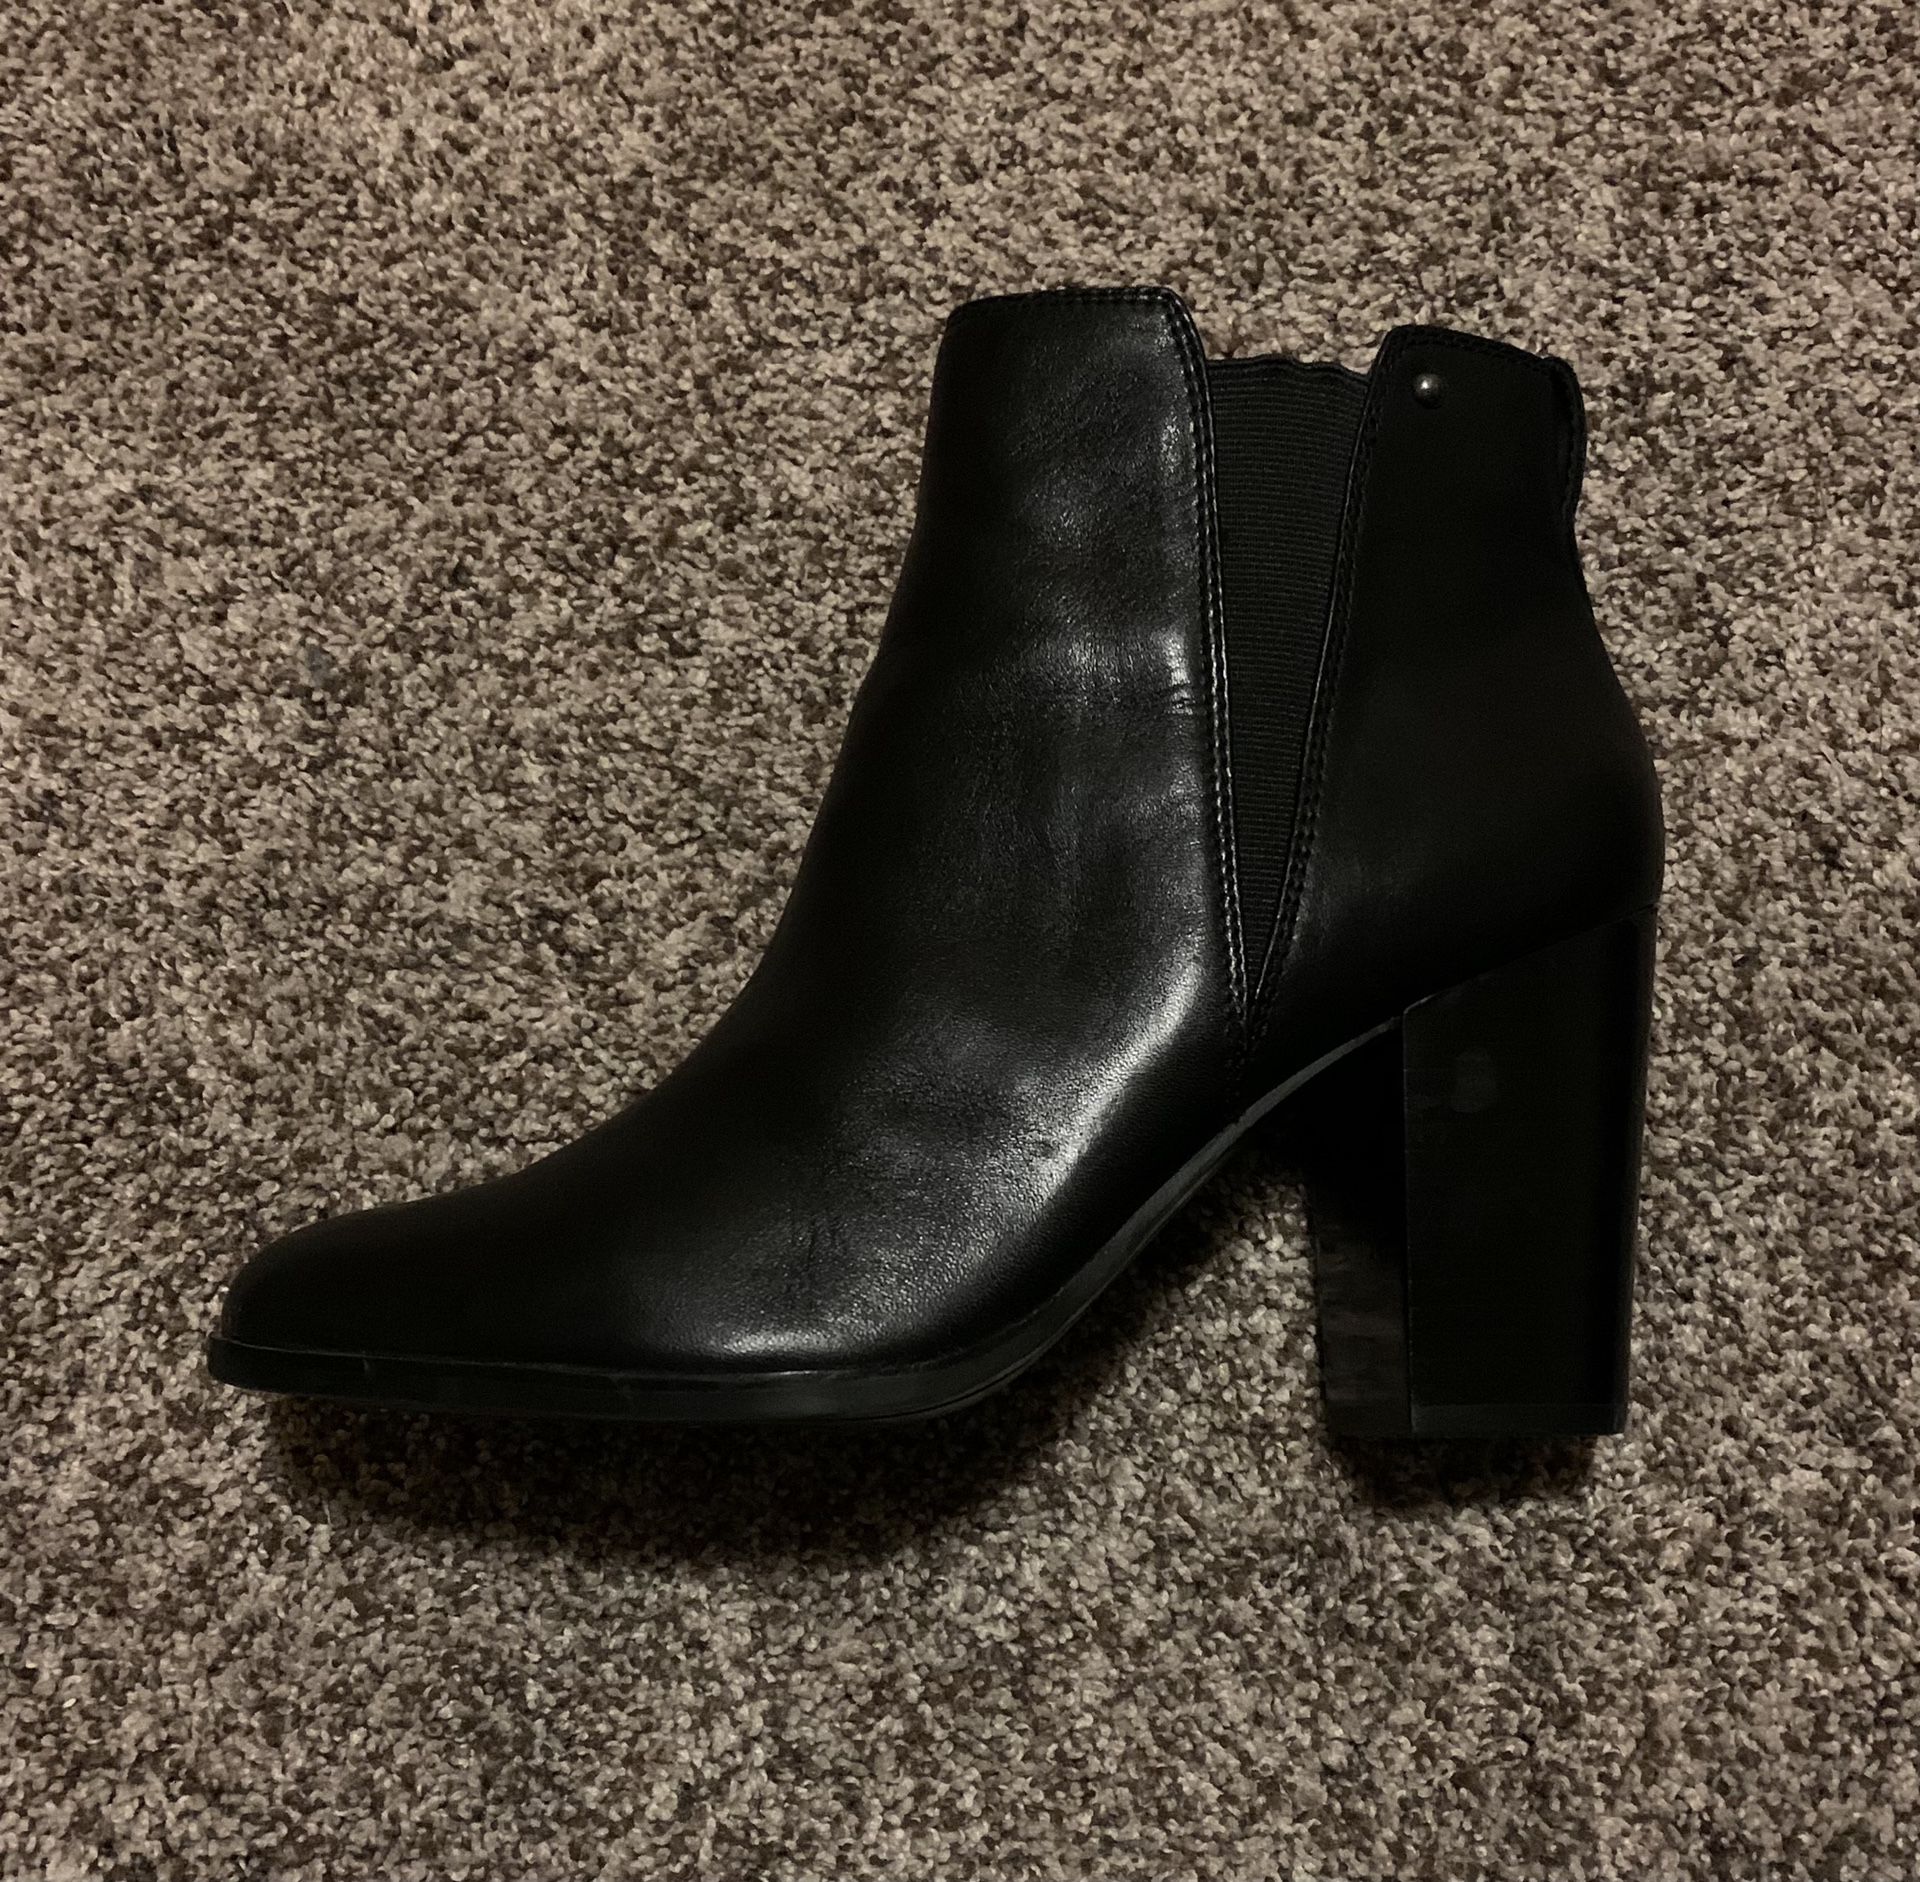 Aldo Ankle High Boots